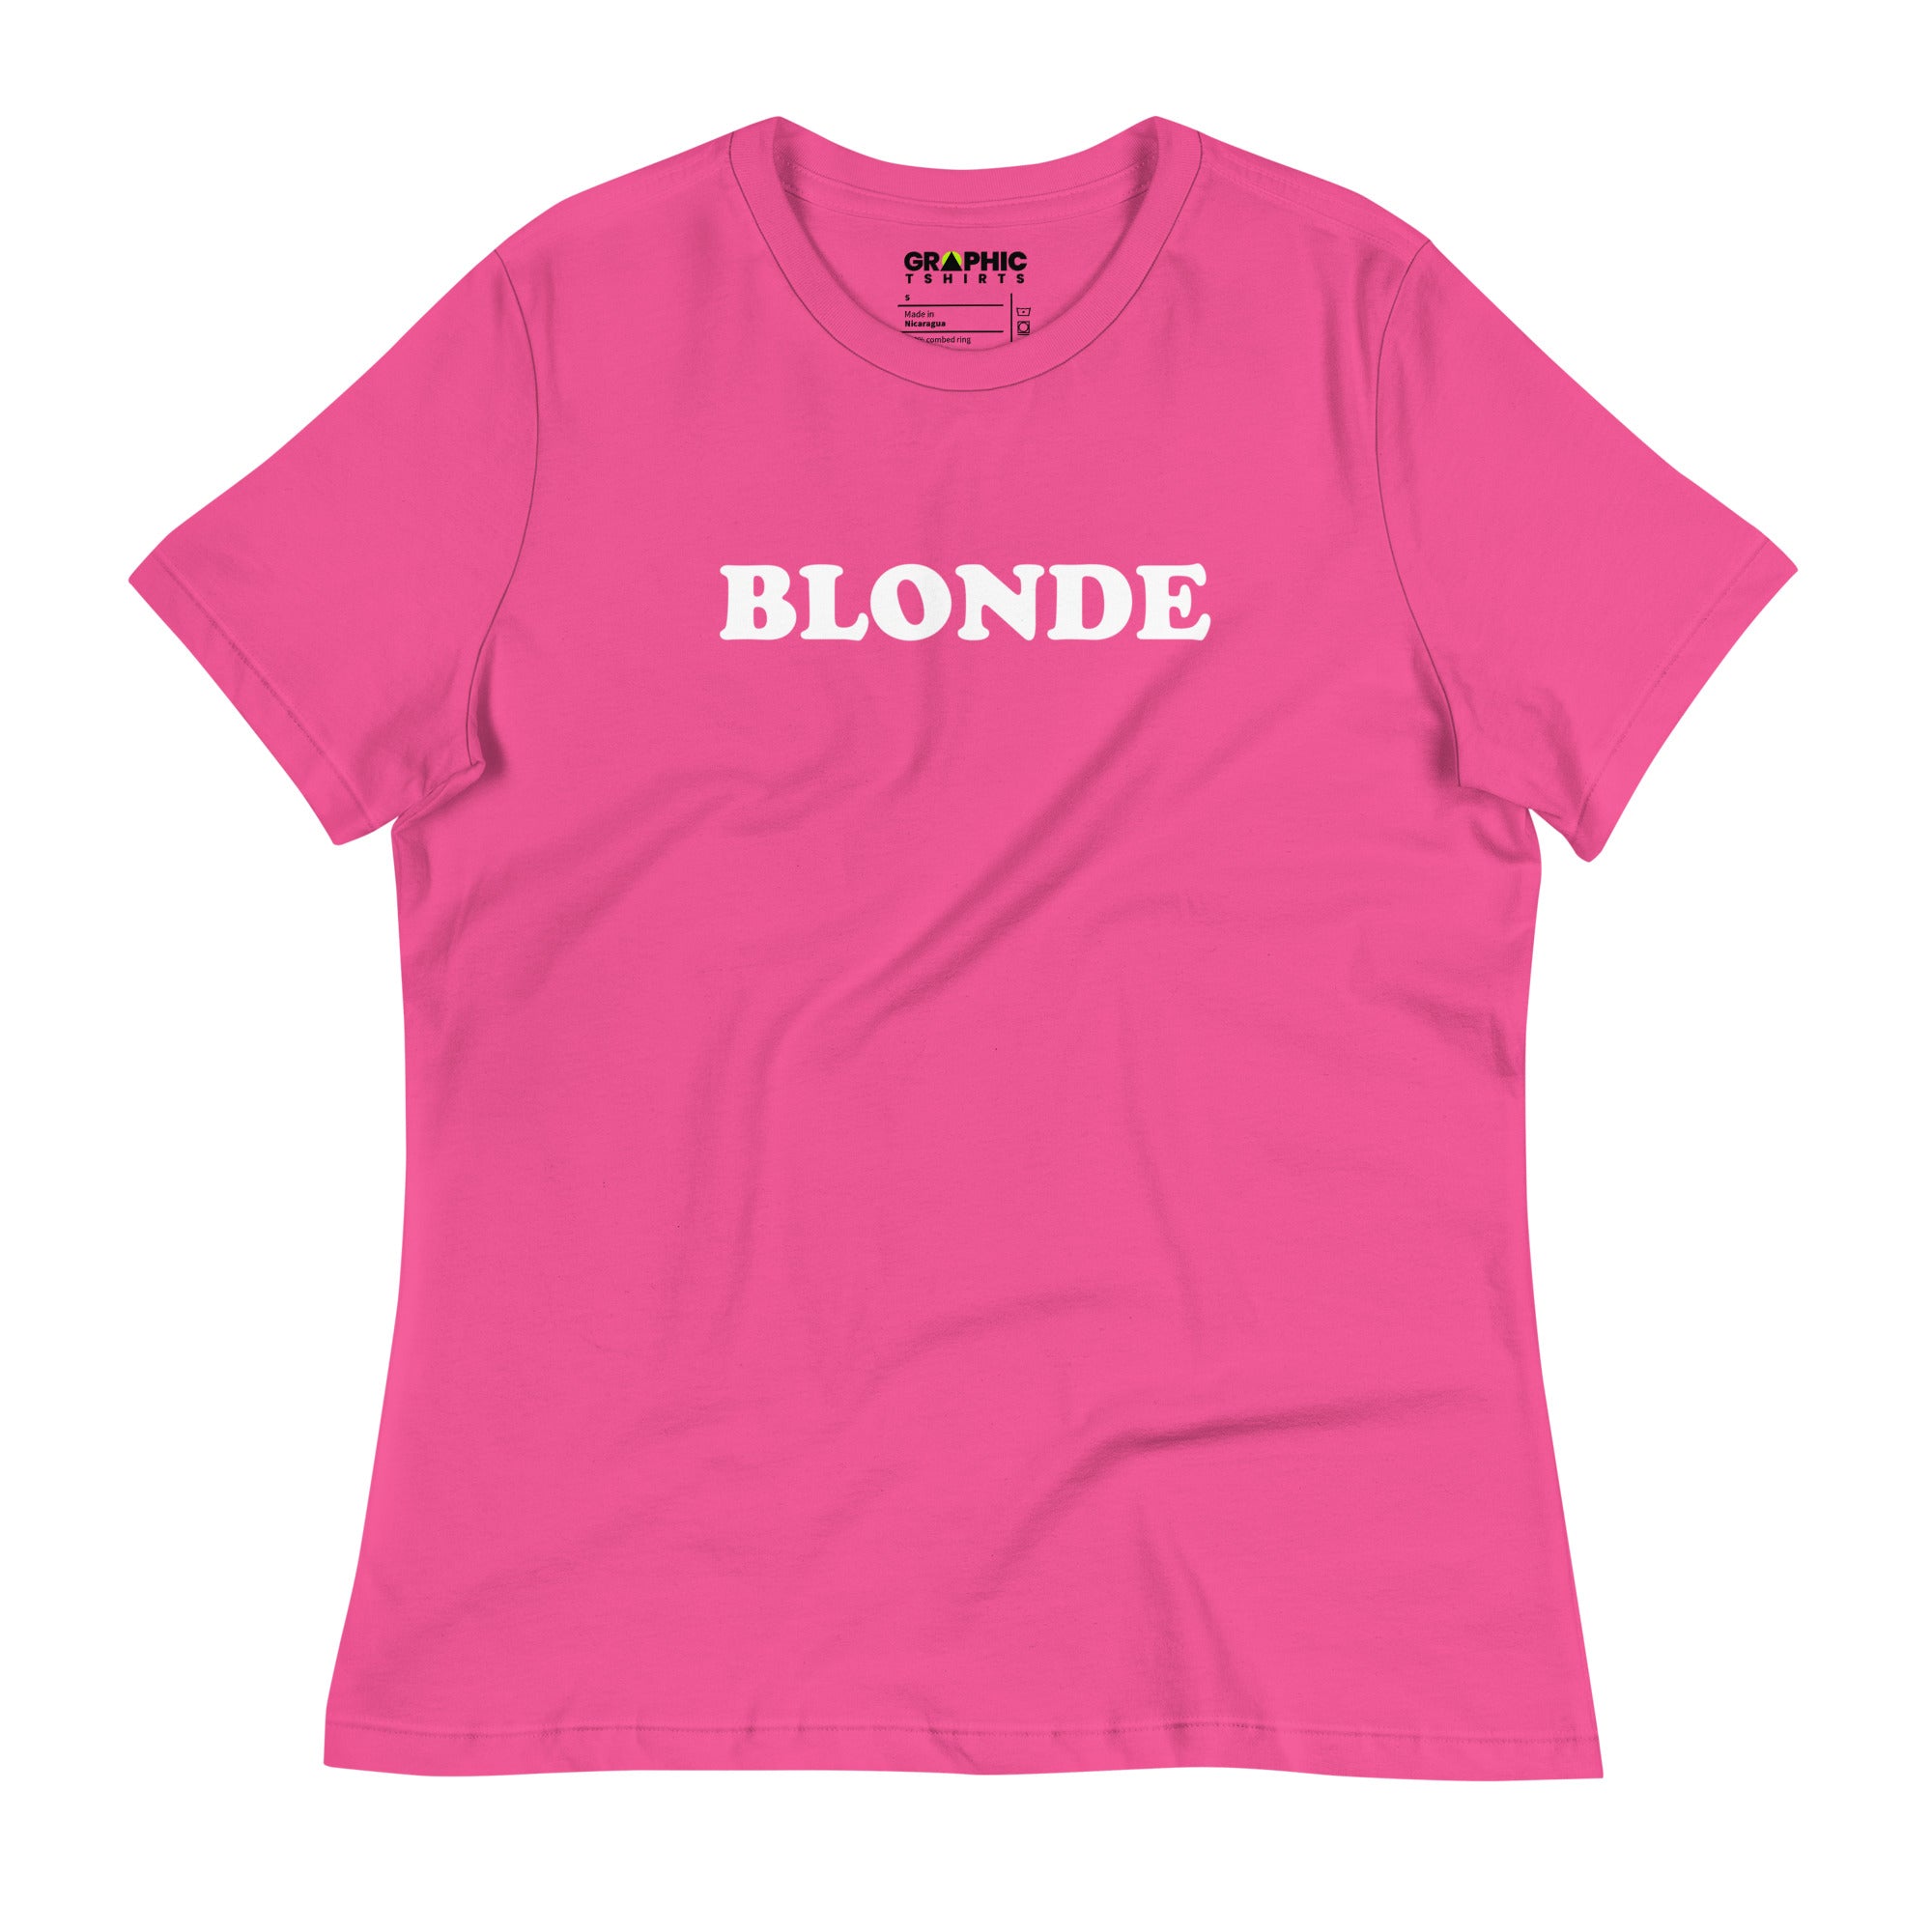 Women's Relaxed T-Shirt - Blonde - GRAPHIC T-SHIRTS